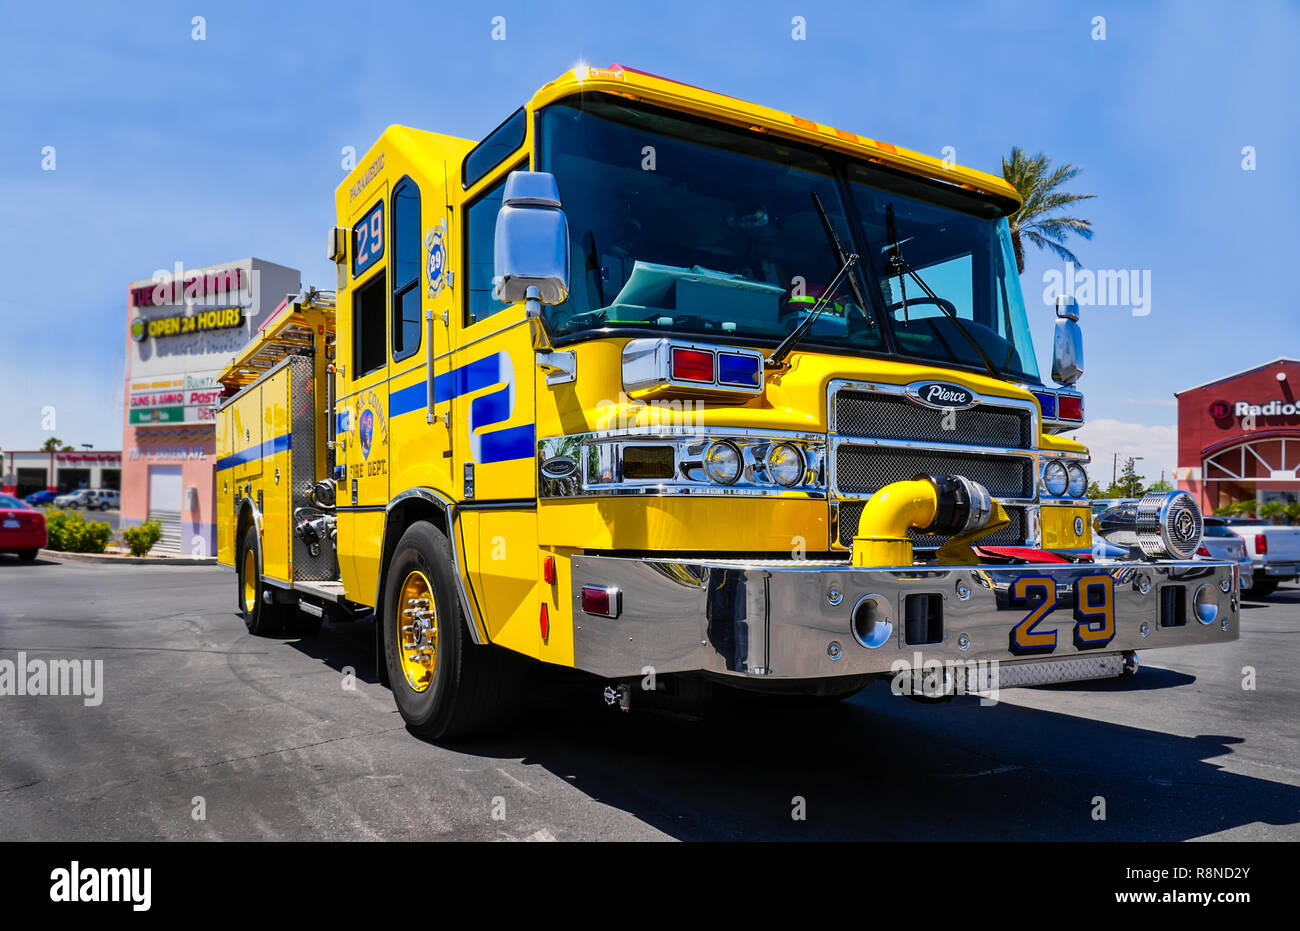 Yellow Fire Truck from the Clark County Fire Department parked on the street in Las Vegas Stock Photo